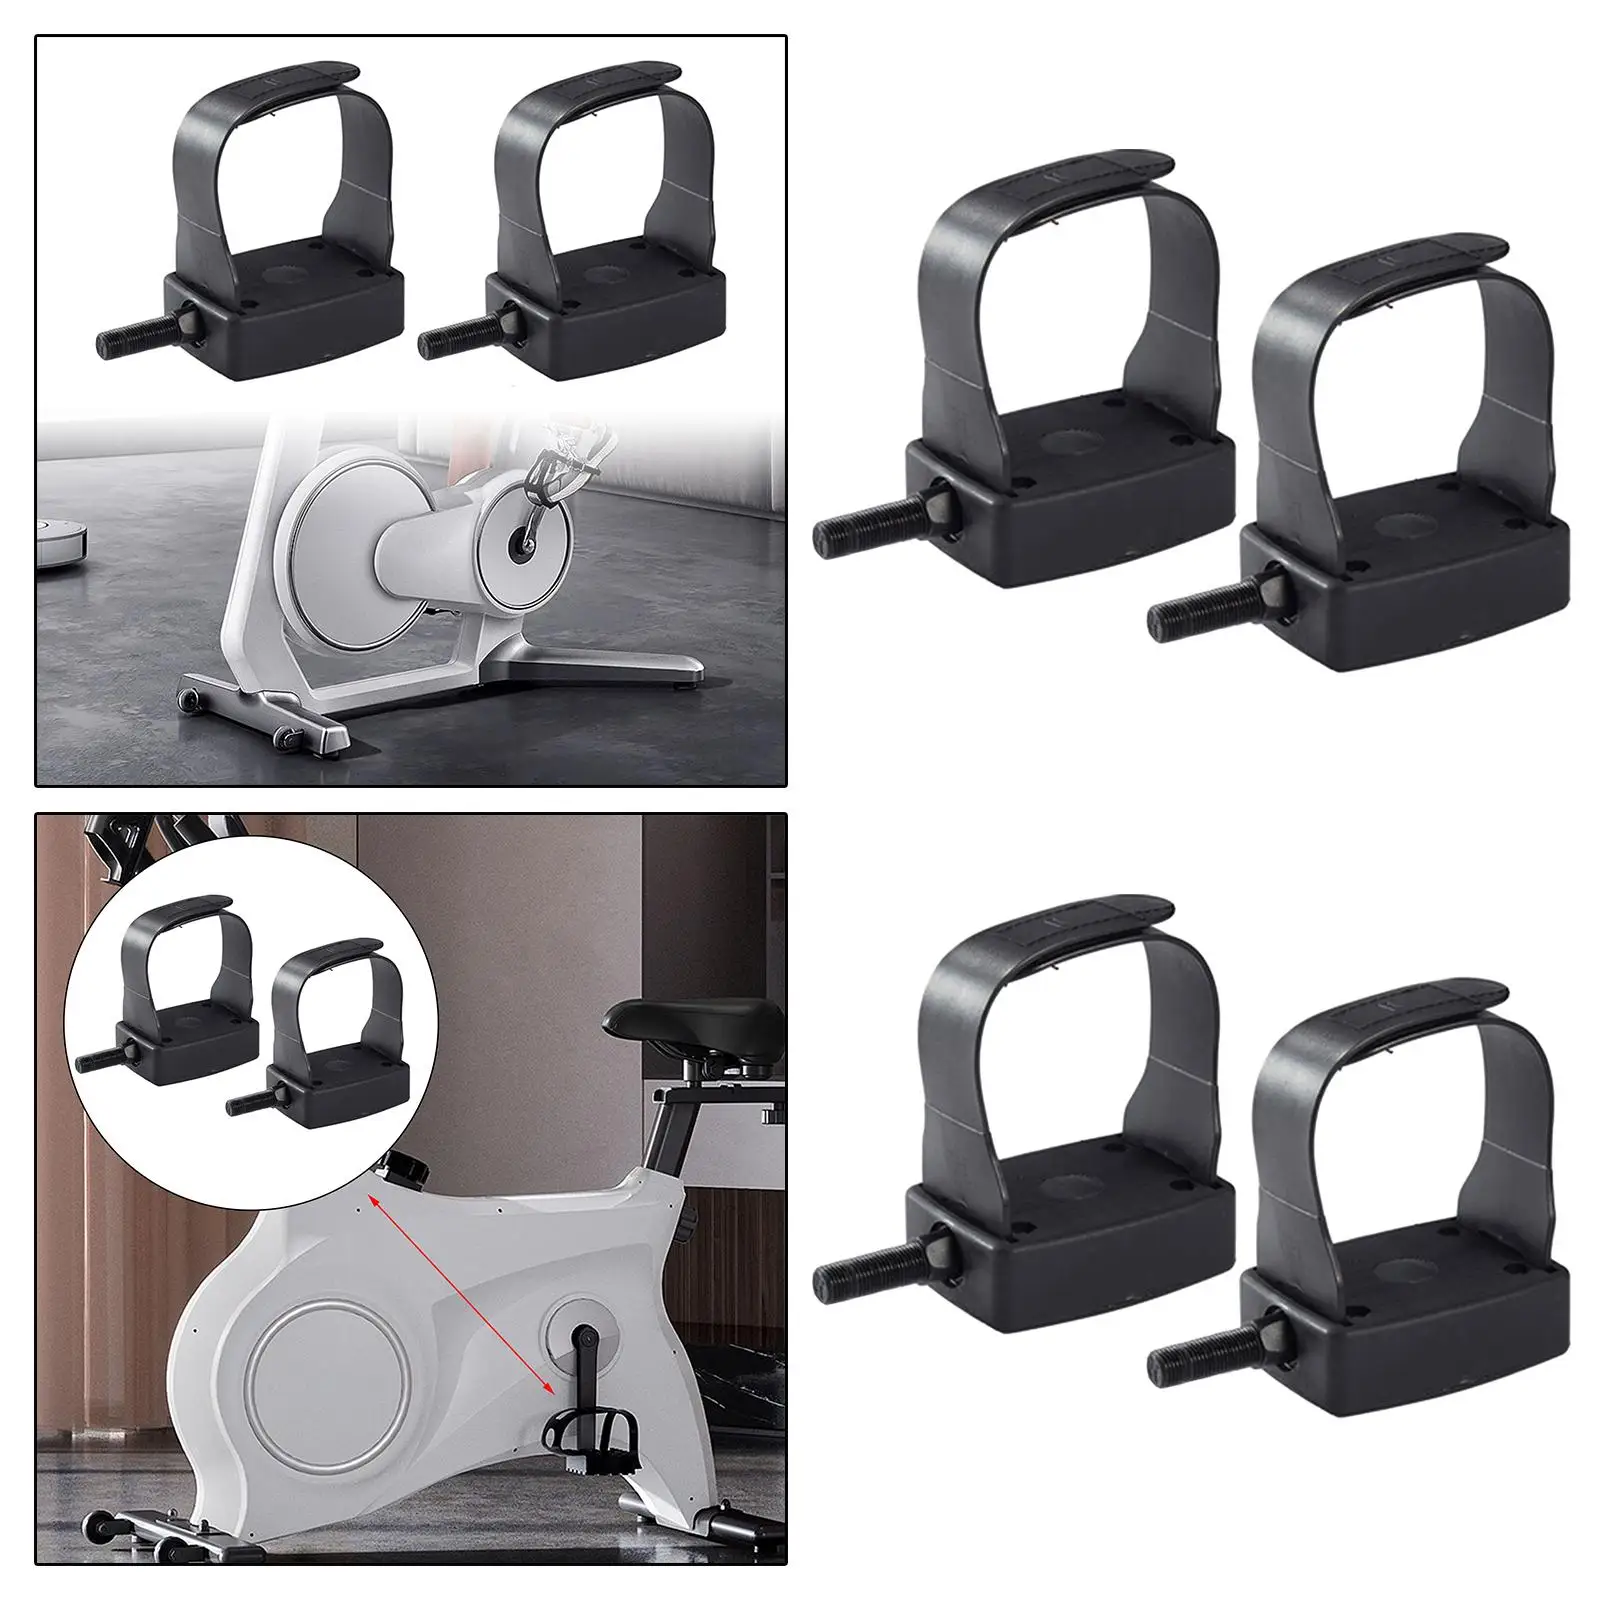 1 Pair Simple to Install Universal Exercise Bike Pedals for Riding Bike Commute